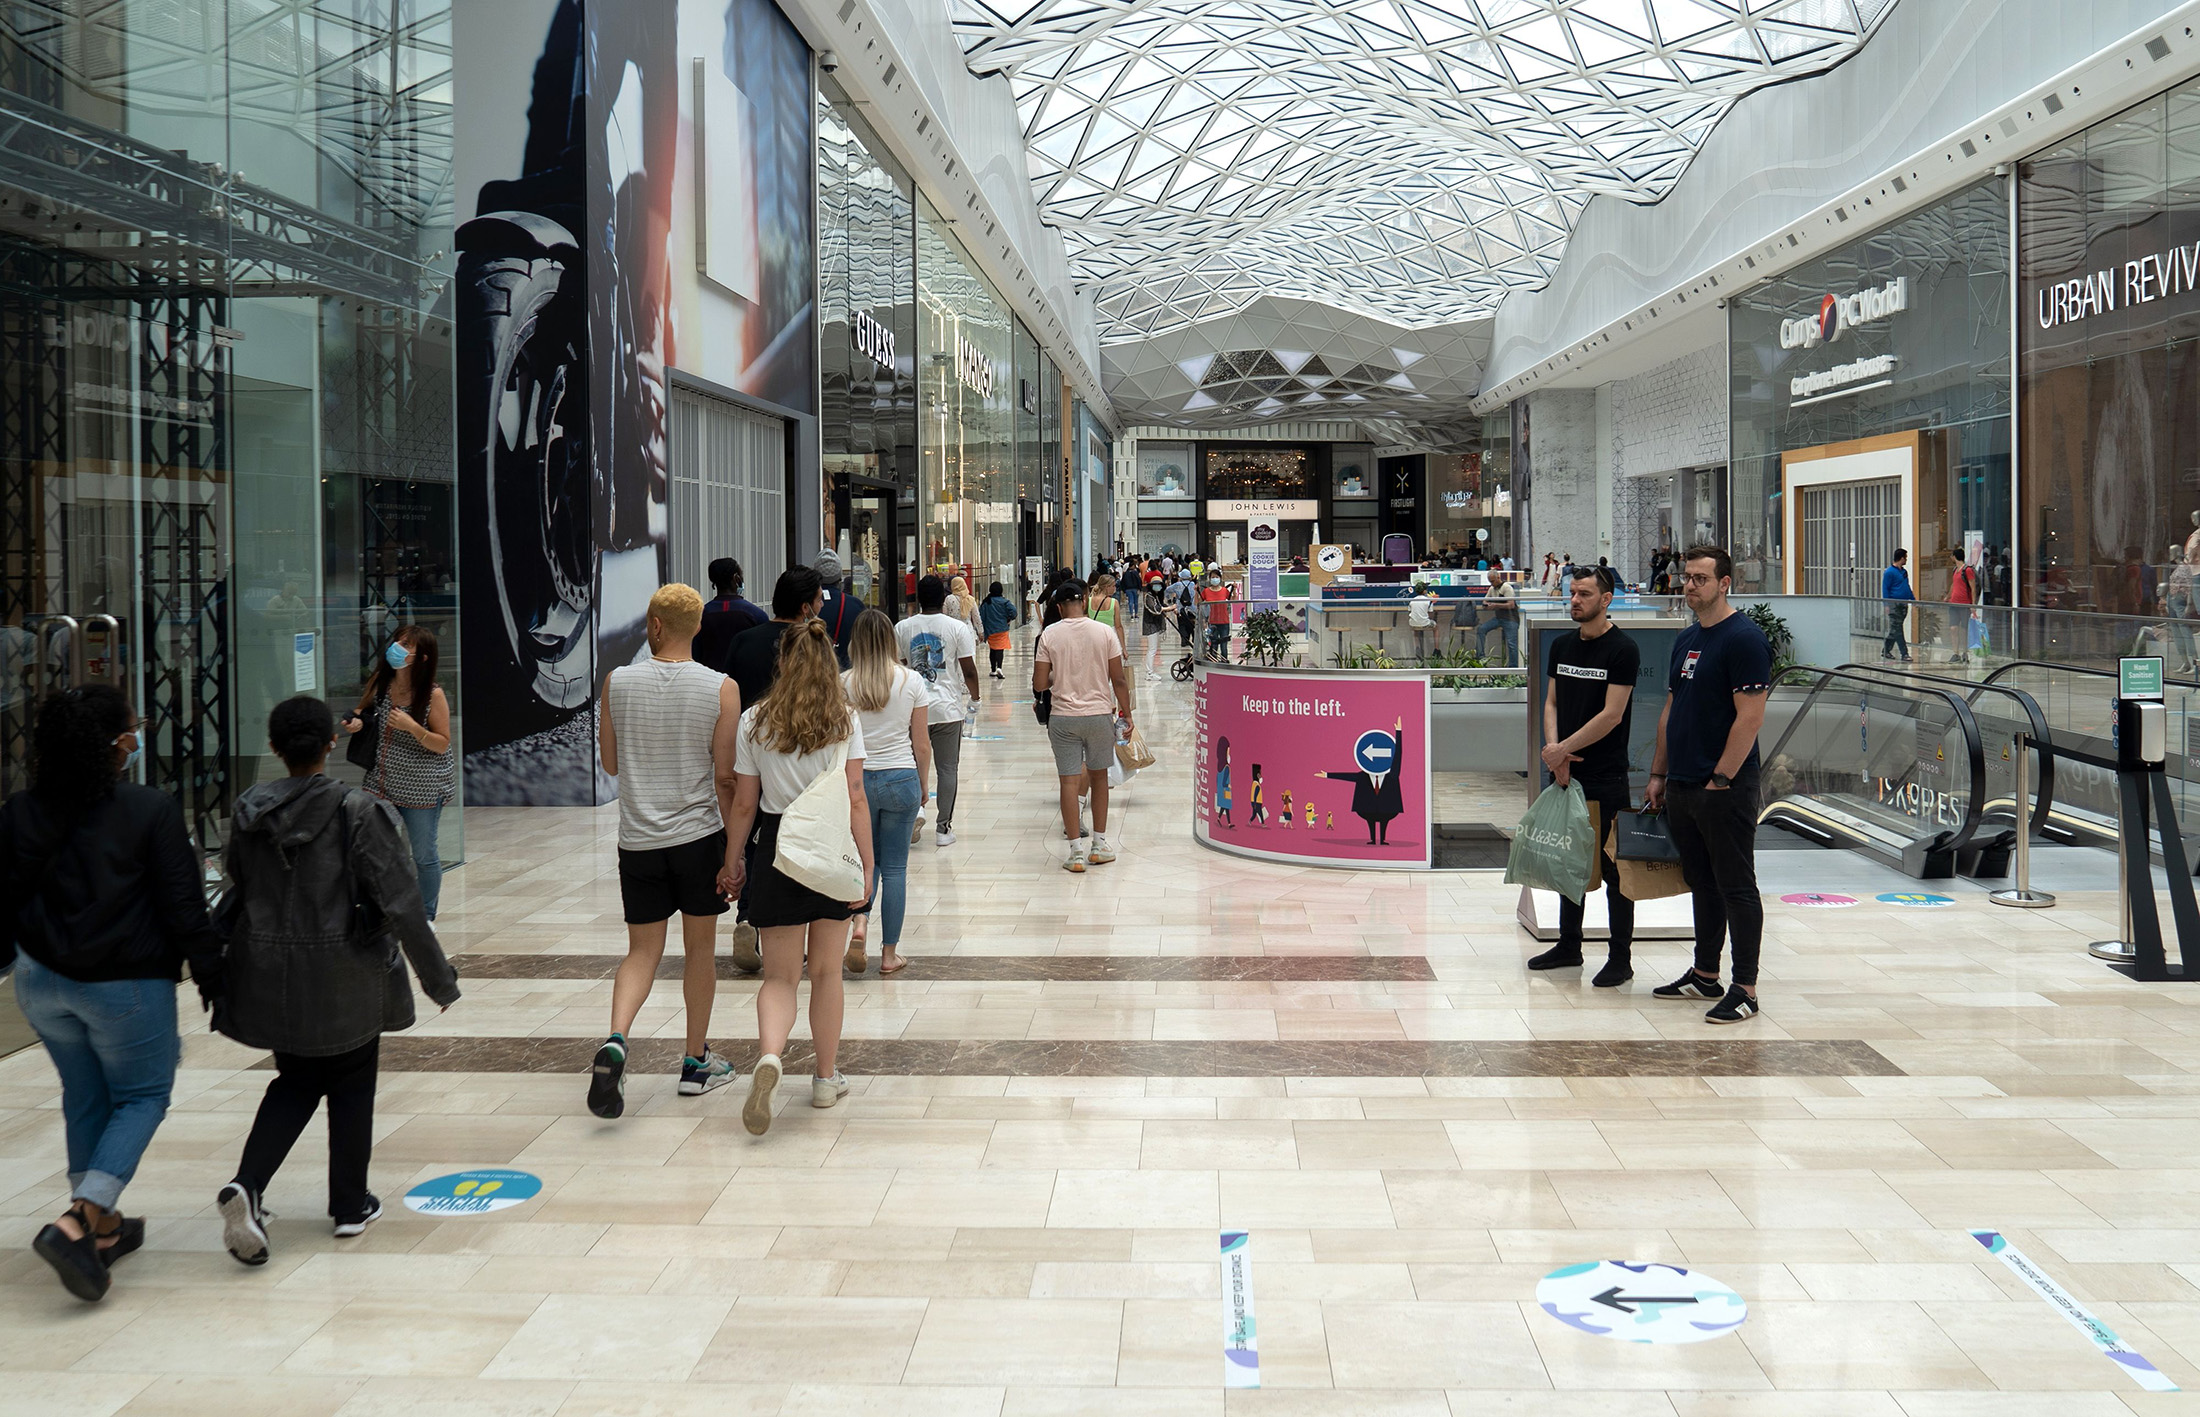 Extension makes Westfield Europe's largest shopping centre